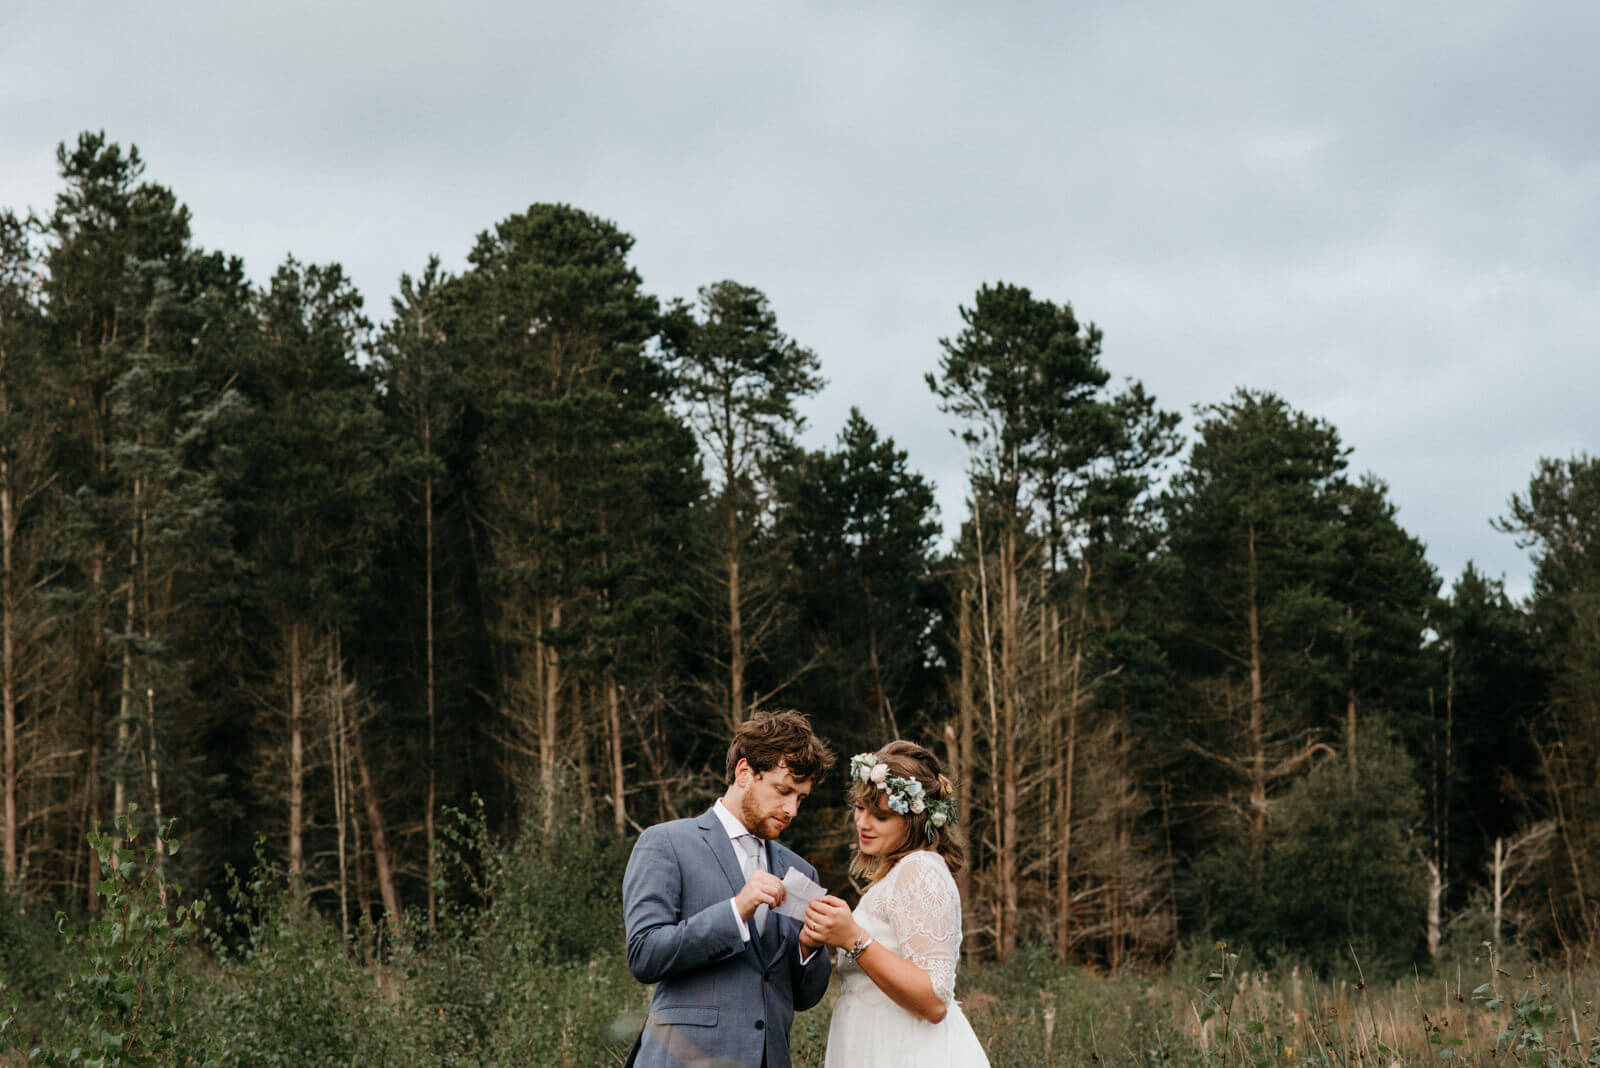 Groom sharing speech details with bride during their portrait session in Mosses Nature Reserve in Shropshire